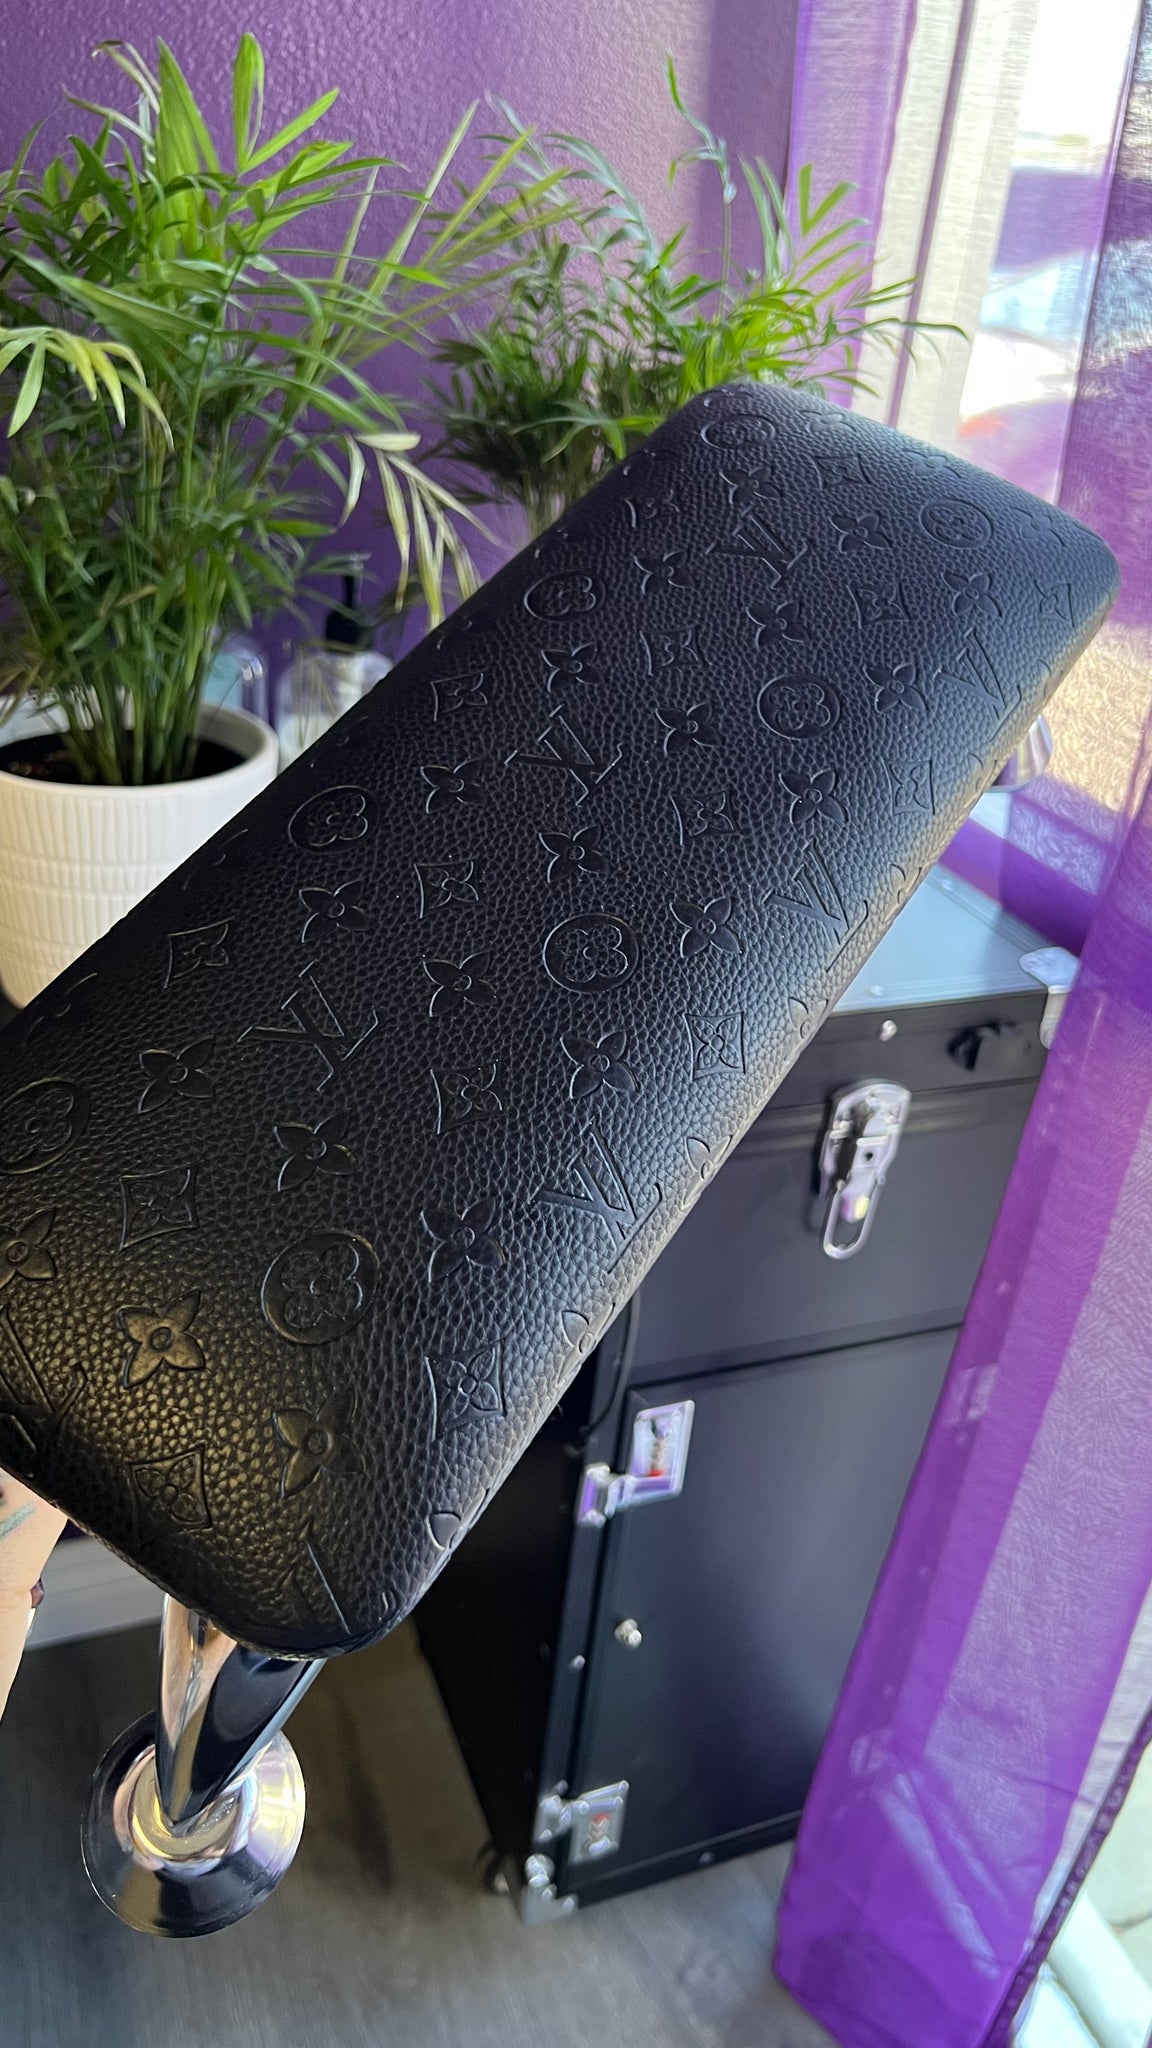 LV ARM REST 💅 Now available on Website Zulaysnails.bigcartel.com #nailart # nail 